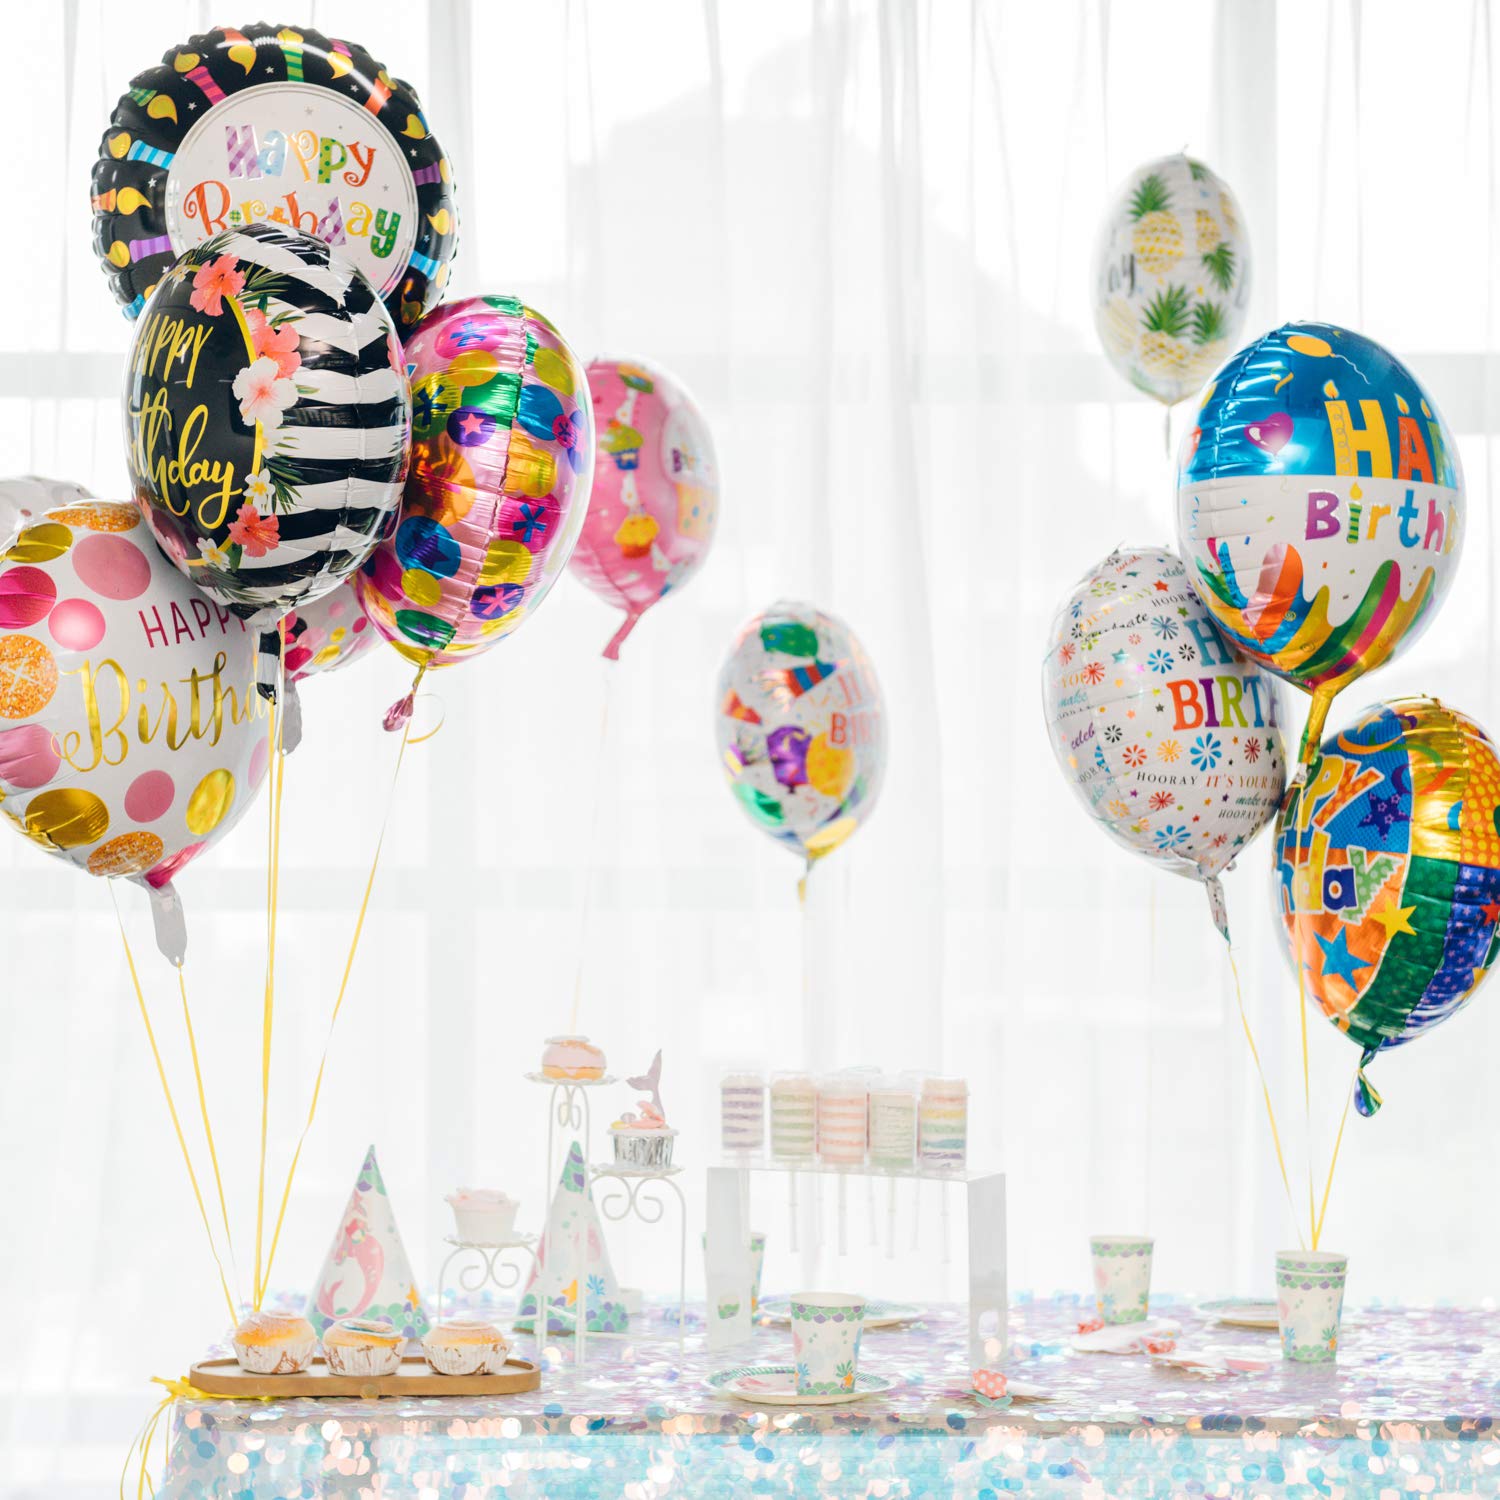 Happy Birthday Aluminum Foil Balloons (50-Pieces) Helium Floating Mylar Balloon Party Decoration Supplies - 18 Inches Round Inflatable Balloons